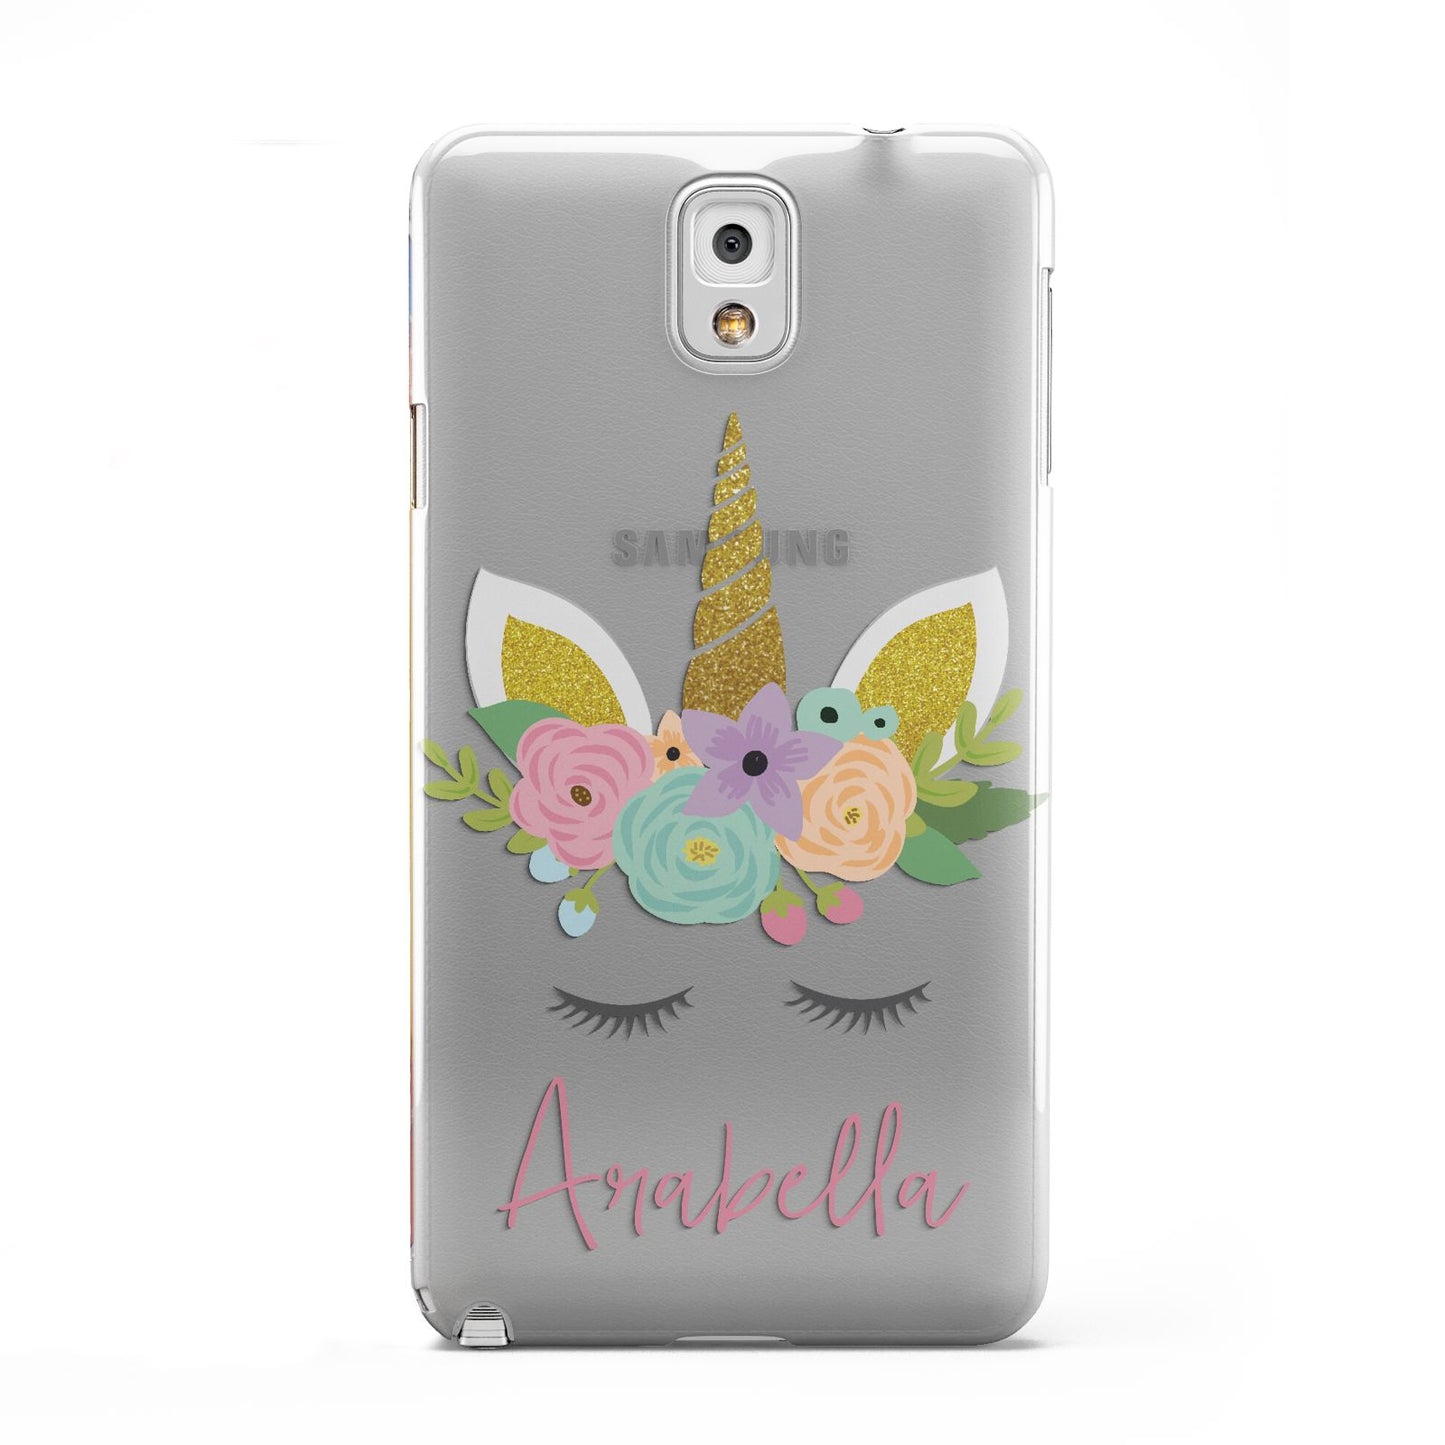 Personalised Unicorn Face Samsung Galaxy Note 3 Case